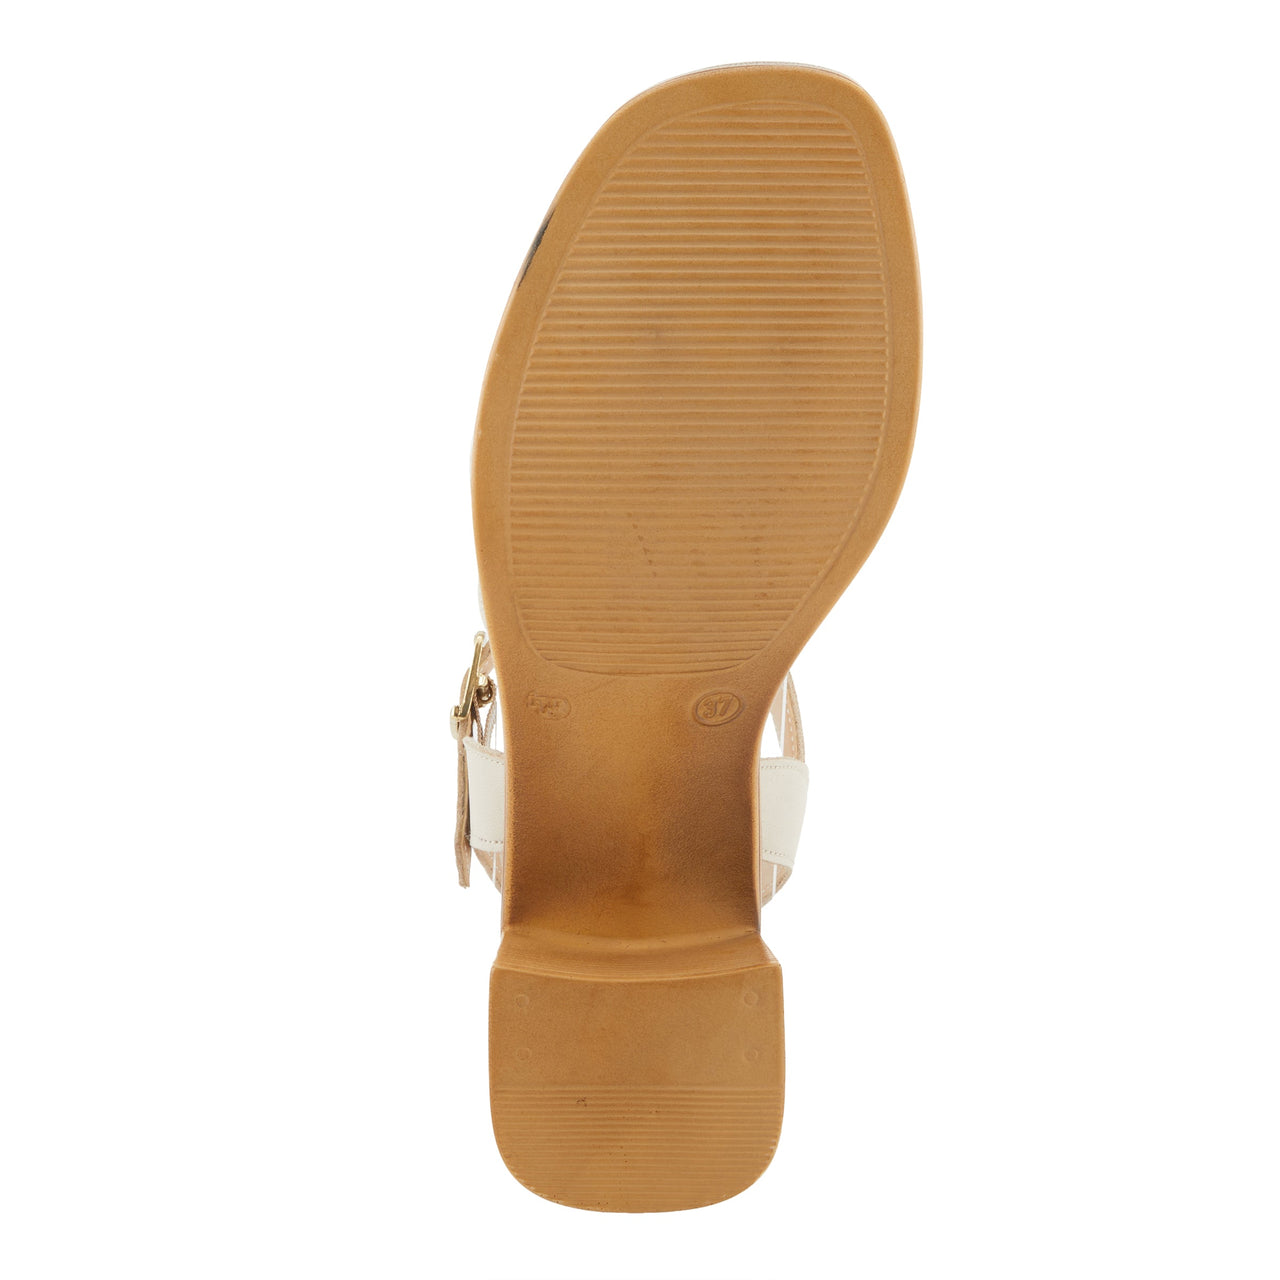  Unique Spring Step Sardinia Sandals in mustard yellow leather with contrast stitching and cushioned footbed